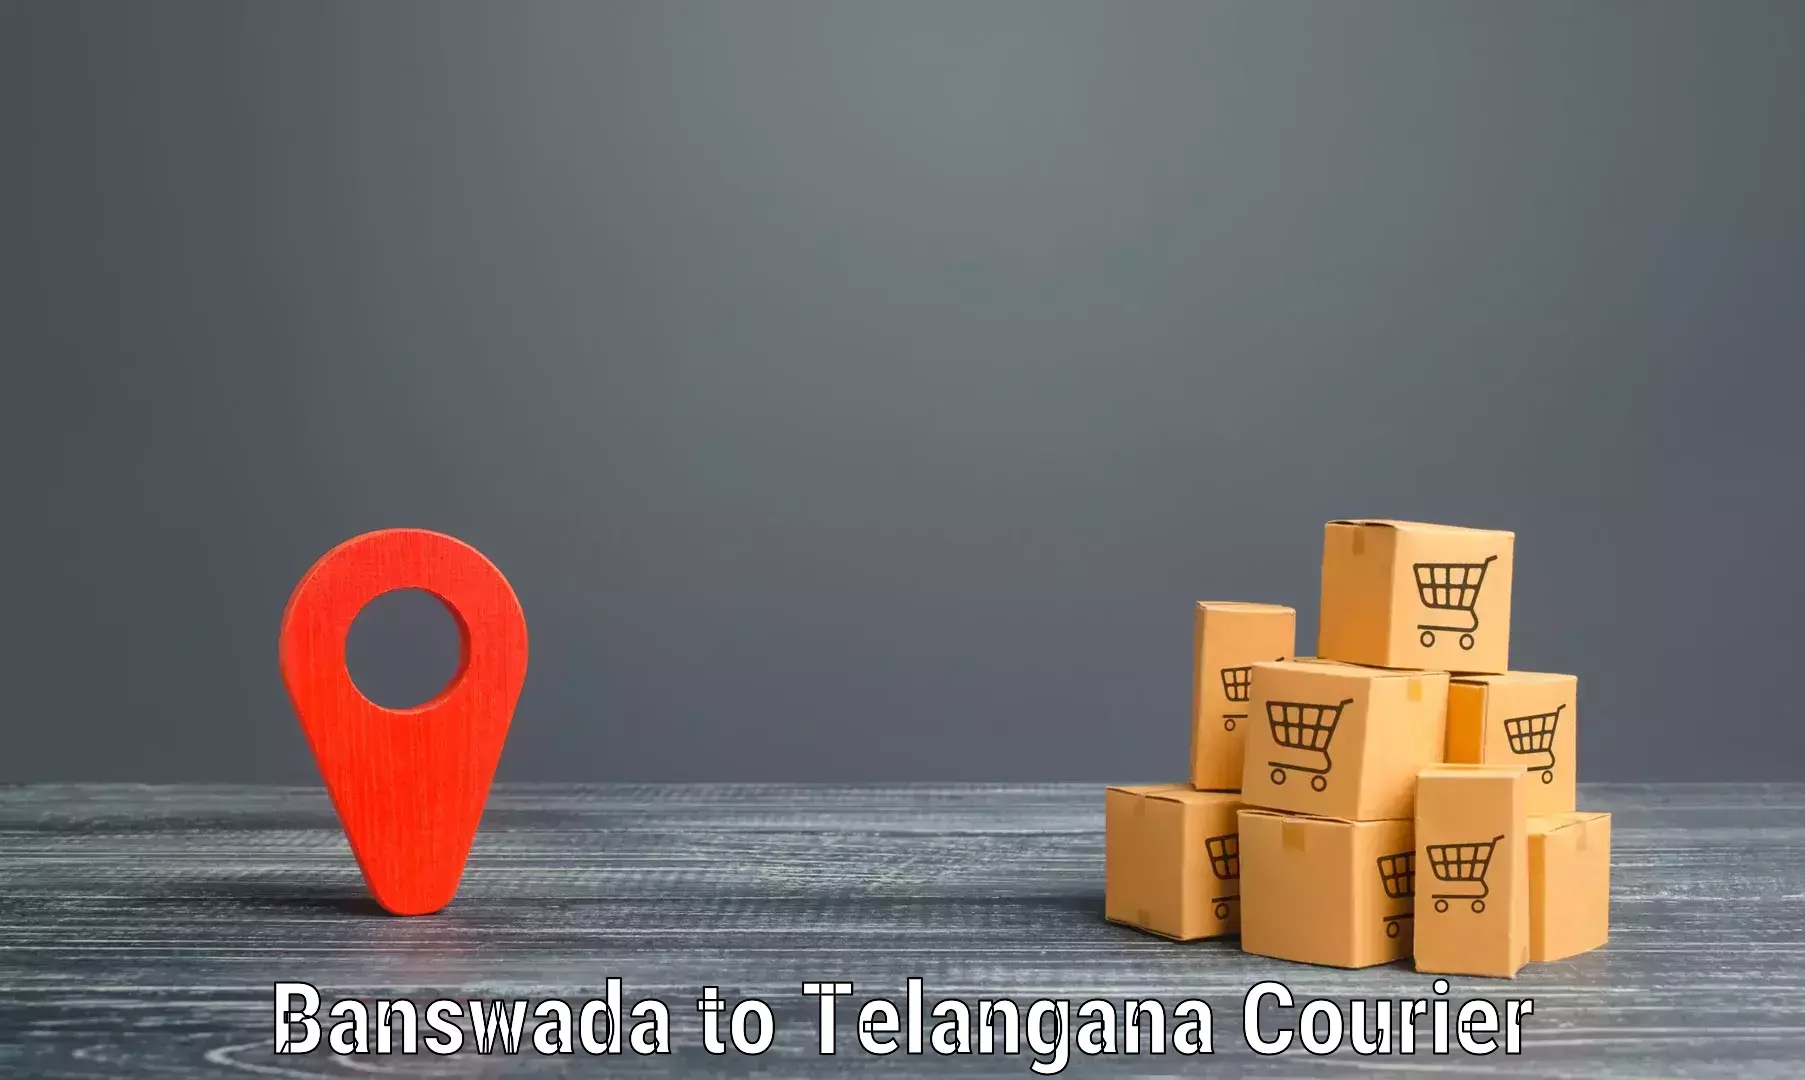 Courier services in Banswada to Gangadhara